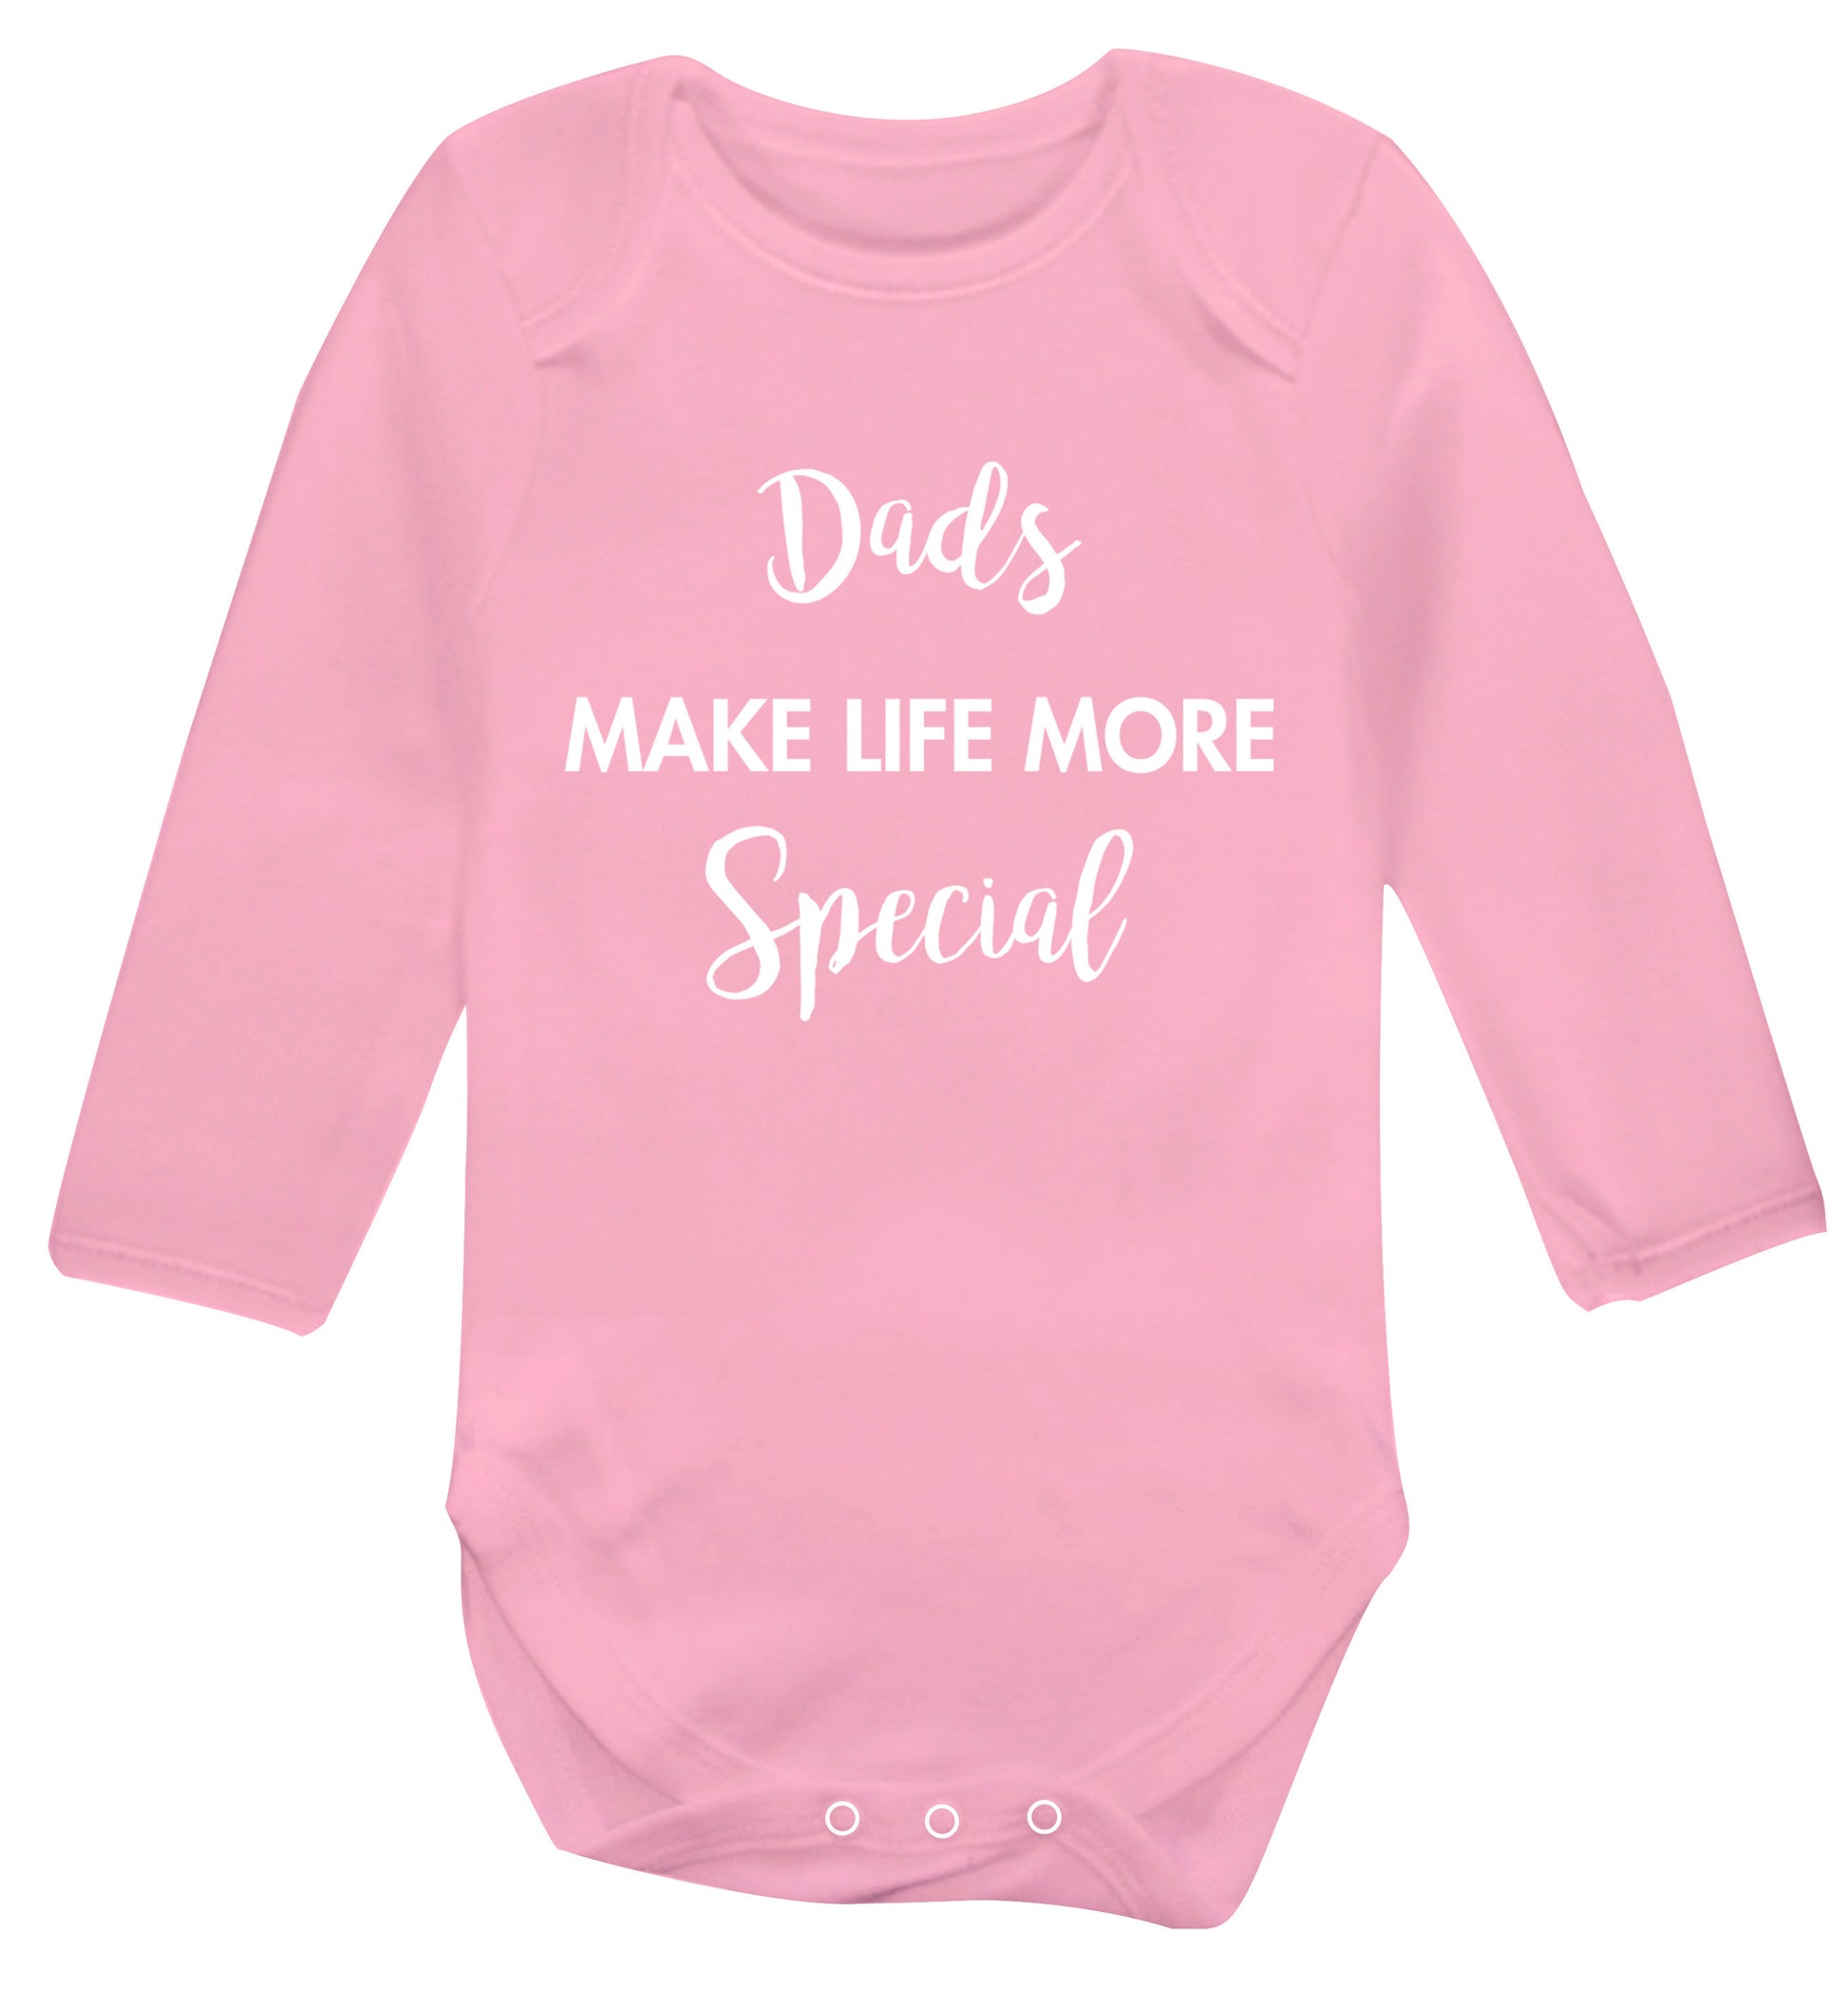 Dads make life more special Baby Vest long sleeved pale pink 6-12 months